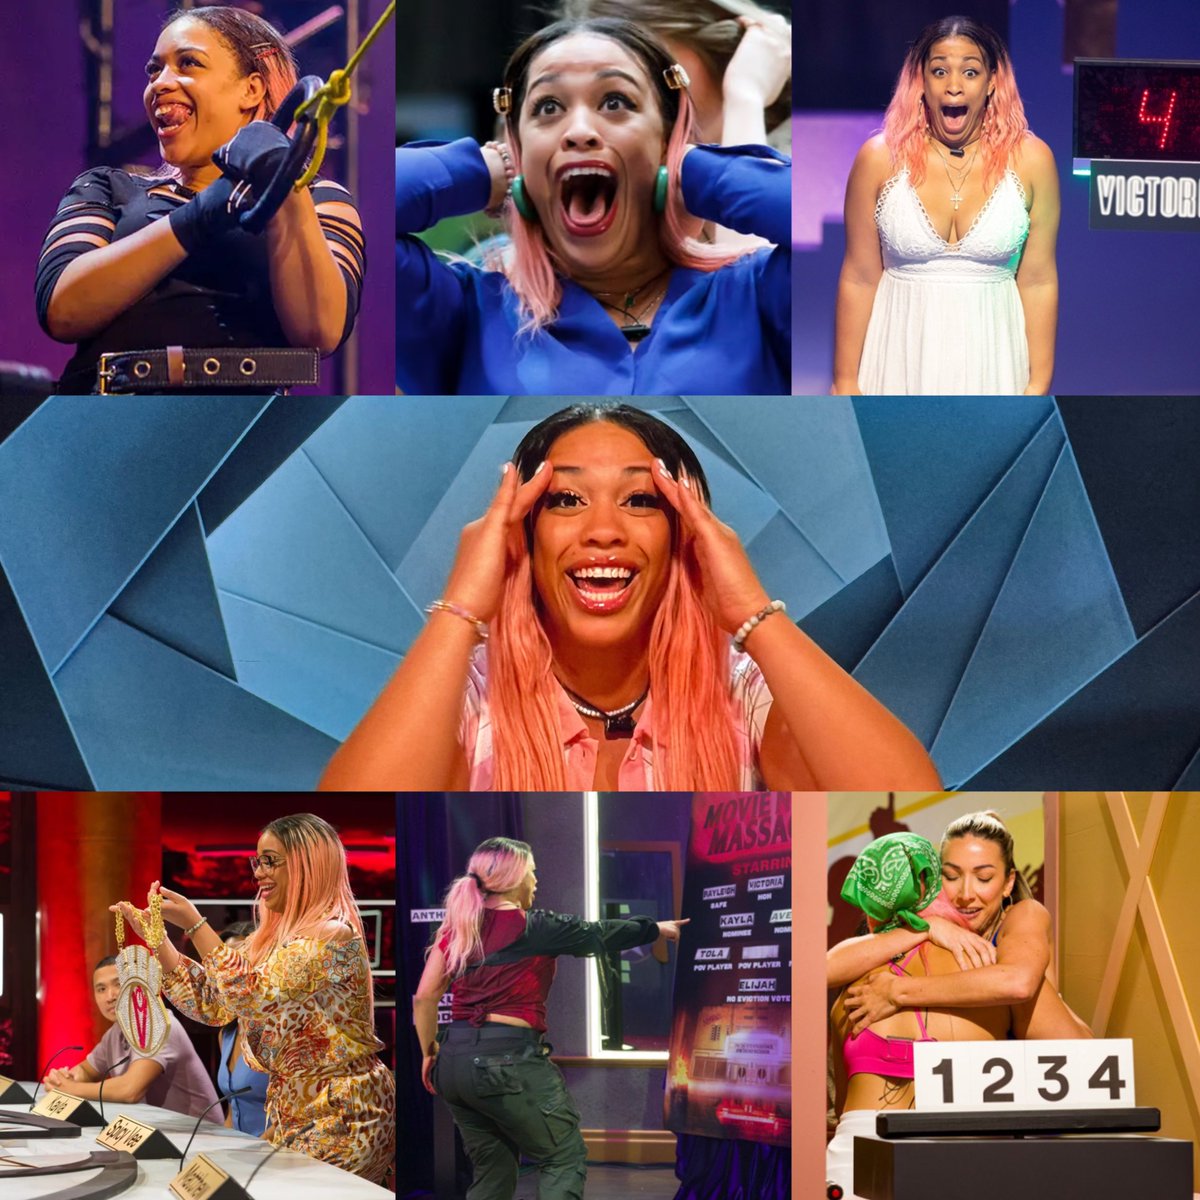 Spicy Vee was made for television. Being able to deliver constant entertainment is a gift in itself, and for 2 seasons, she gave us some of the wildest hoh reigns, fights, good feeds, intense campaigns and proved time and time again that she's a badass female competitor. #BBCAN12